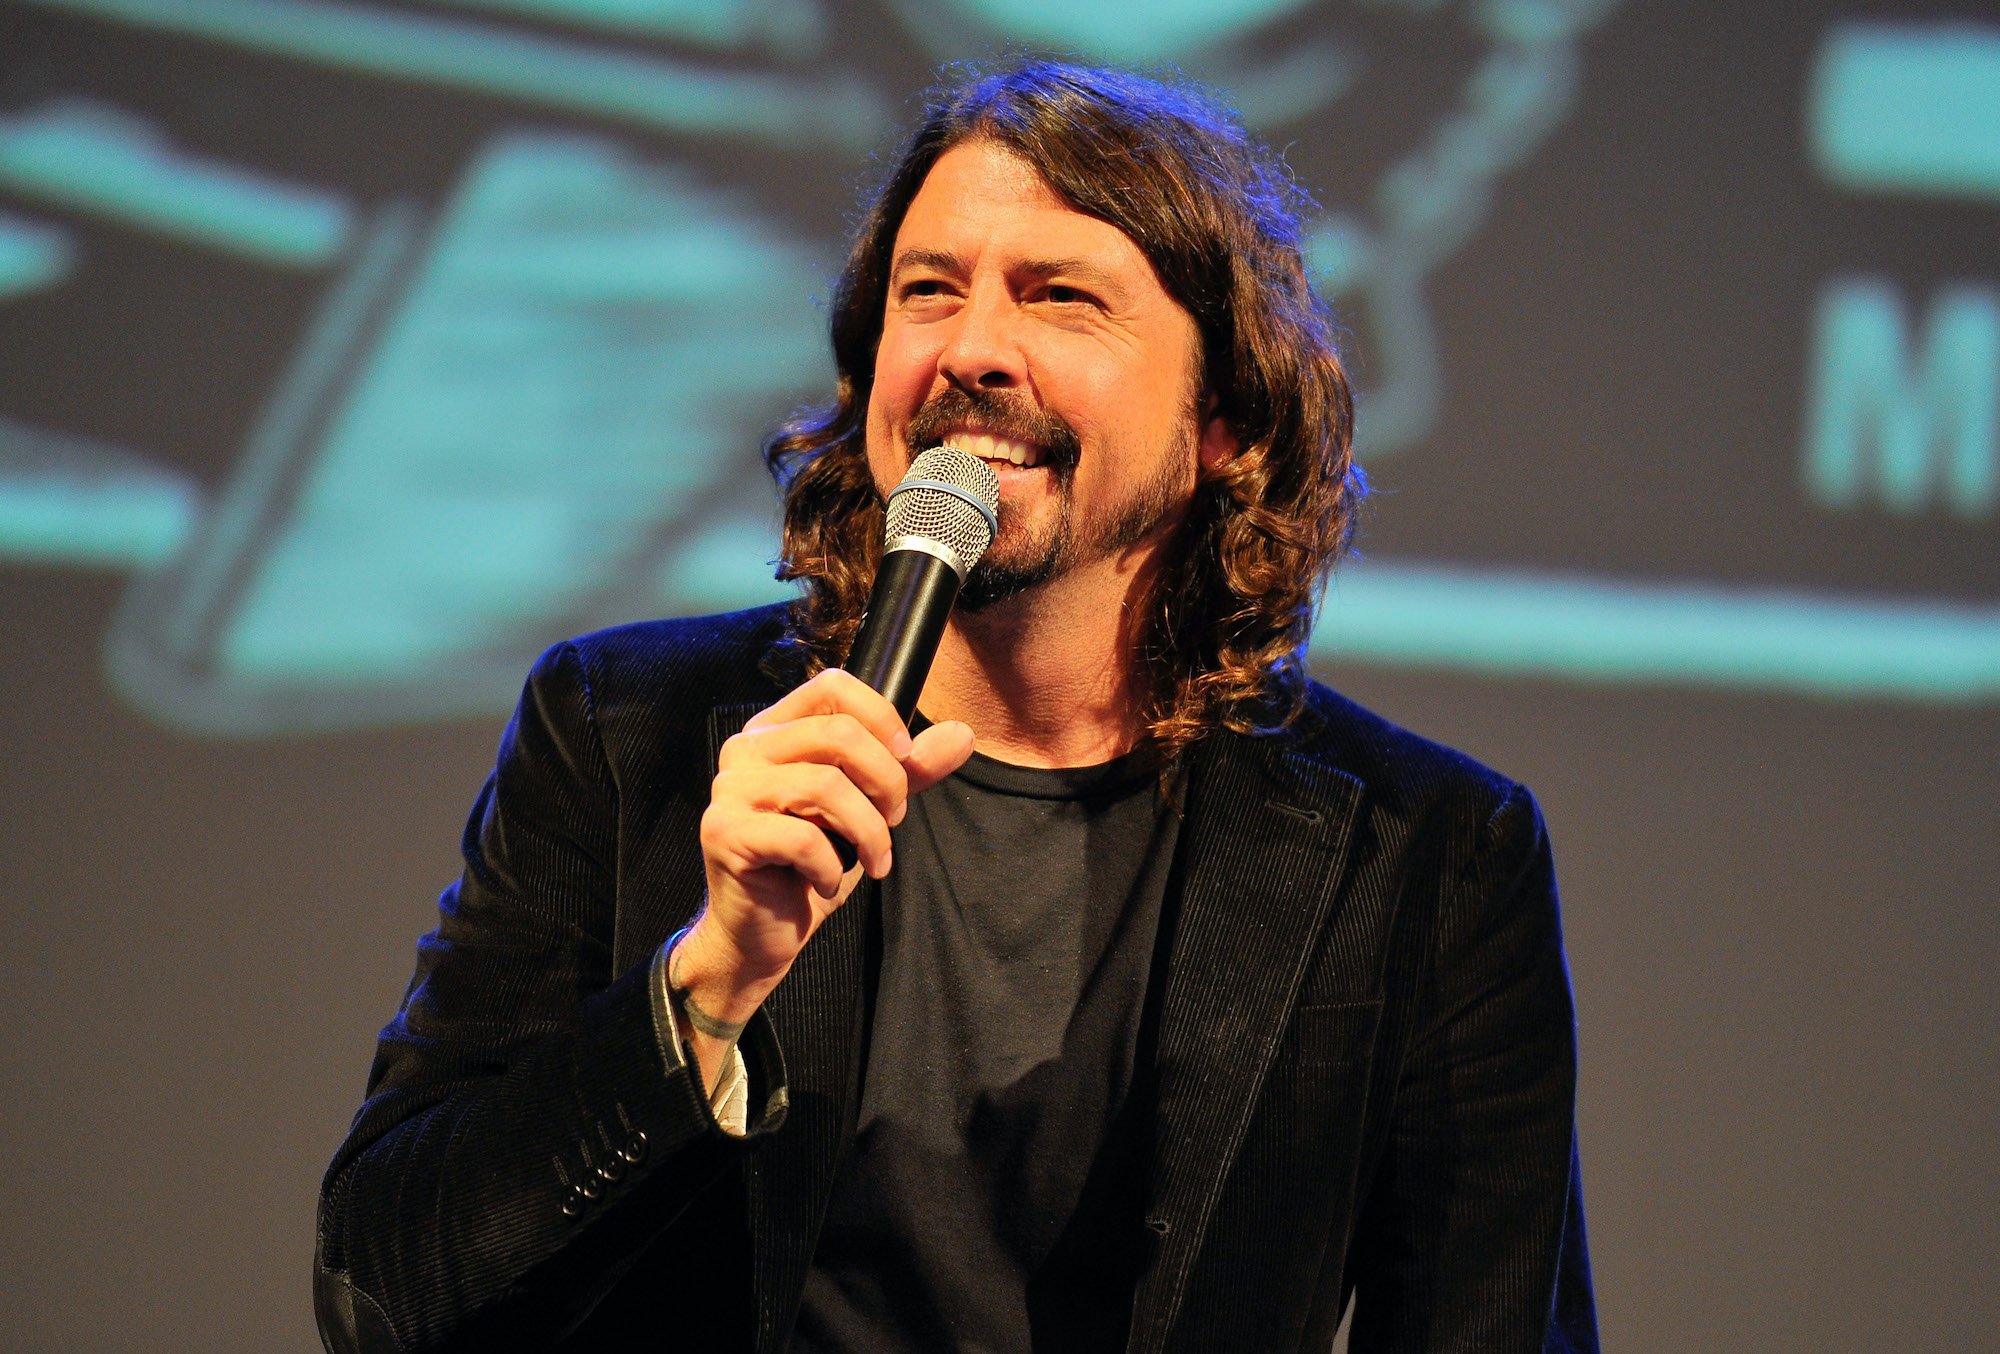 Dave Grohl smiling, holding a microphone